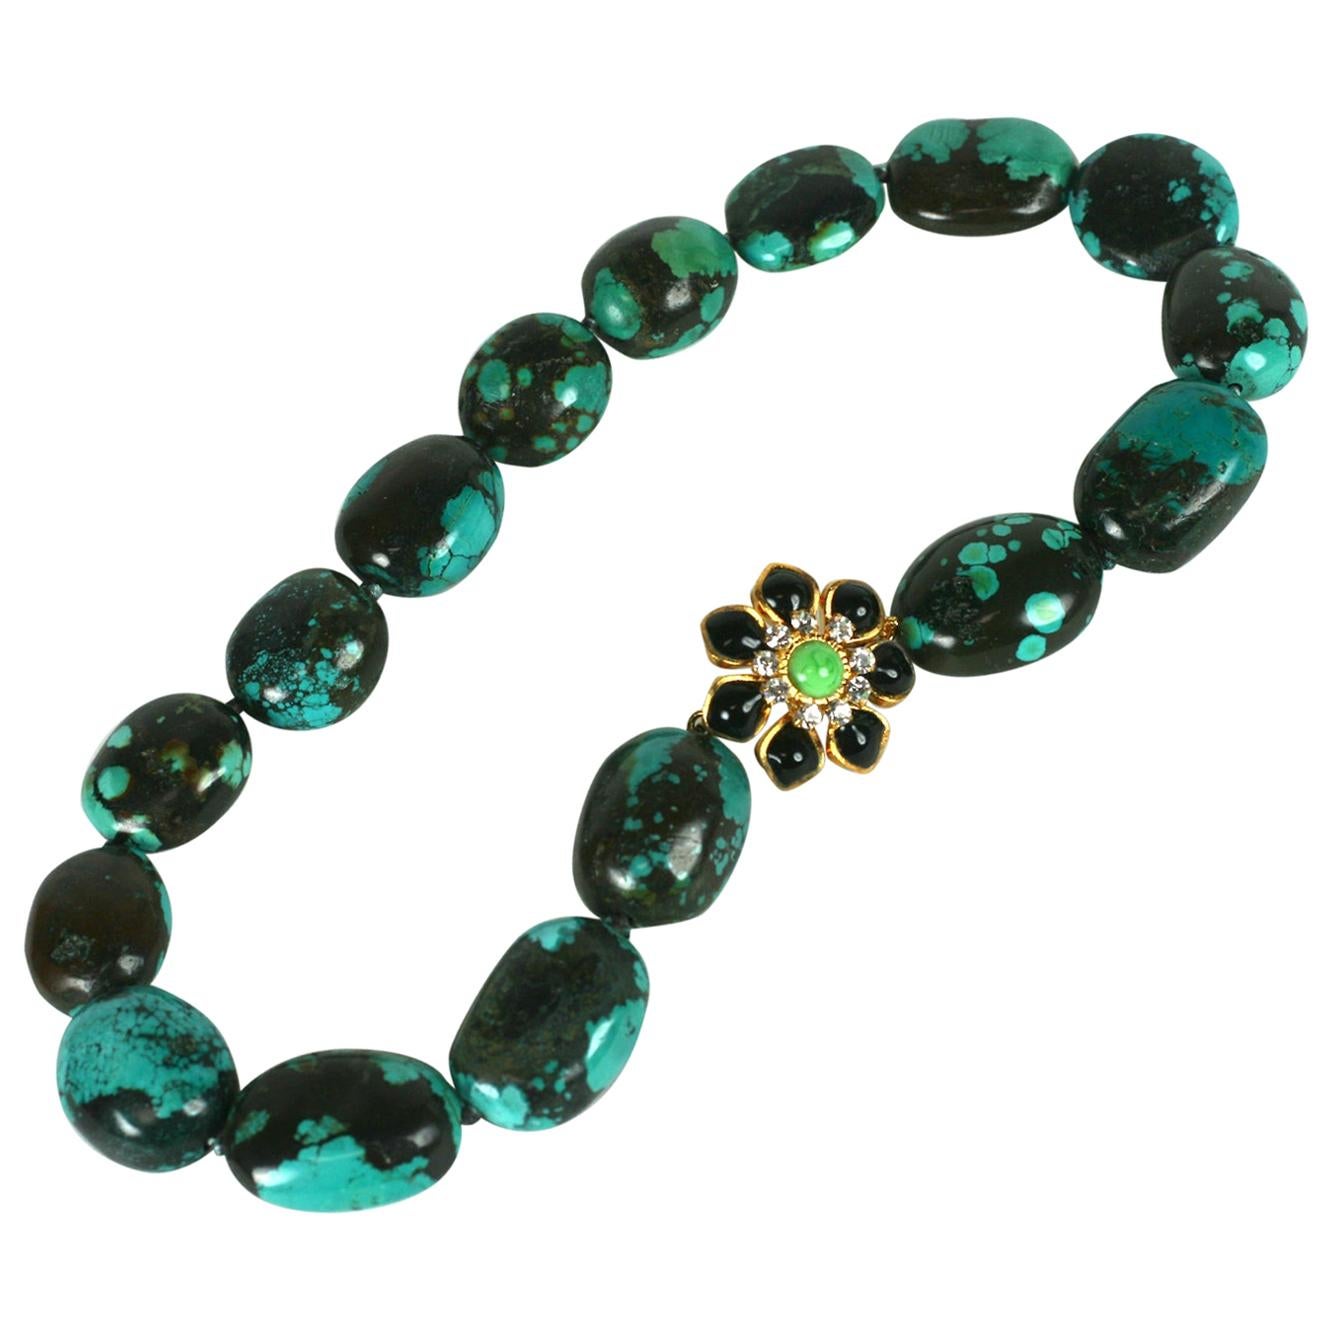 Matrix Turquoise and Poured Glass Marguerite Necklace, MWLC For Sale